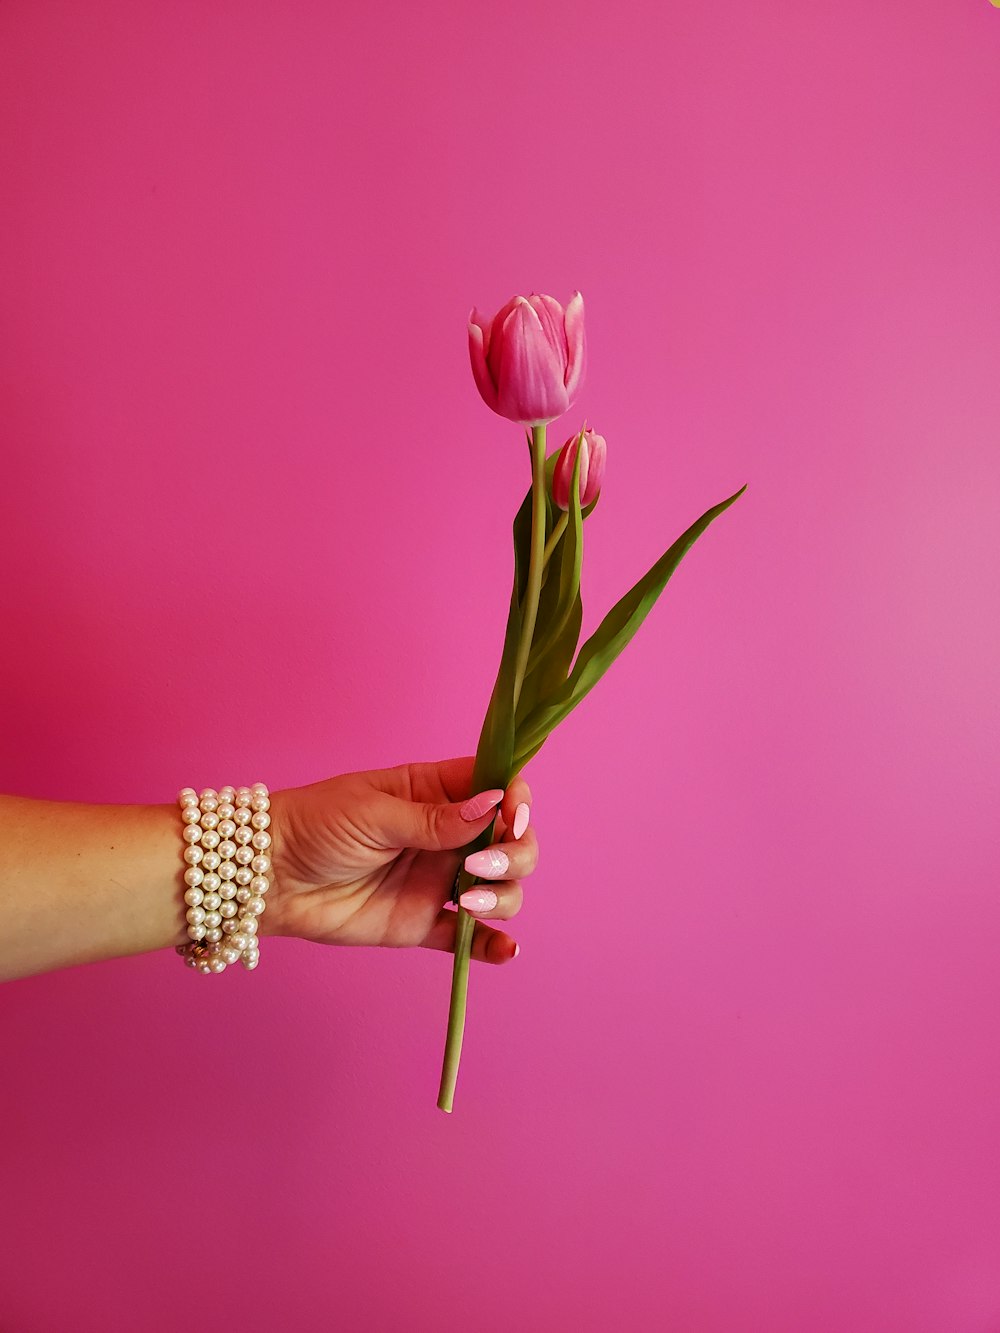 a woman's hand holding a single pink tulip